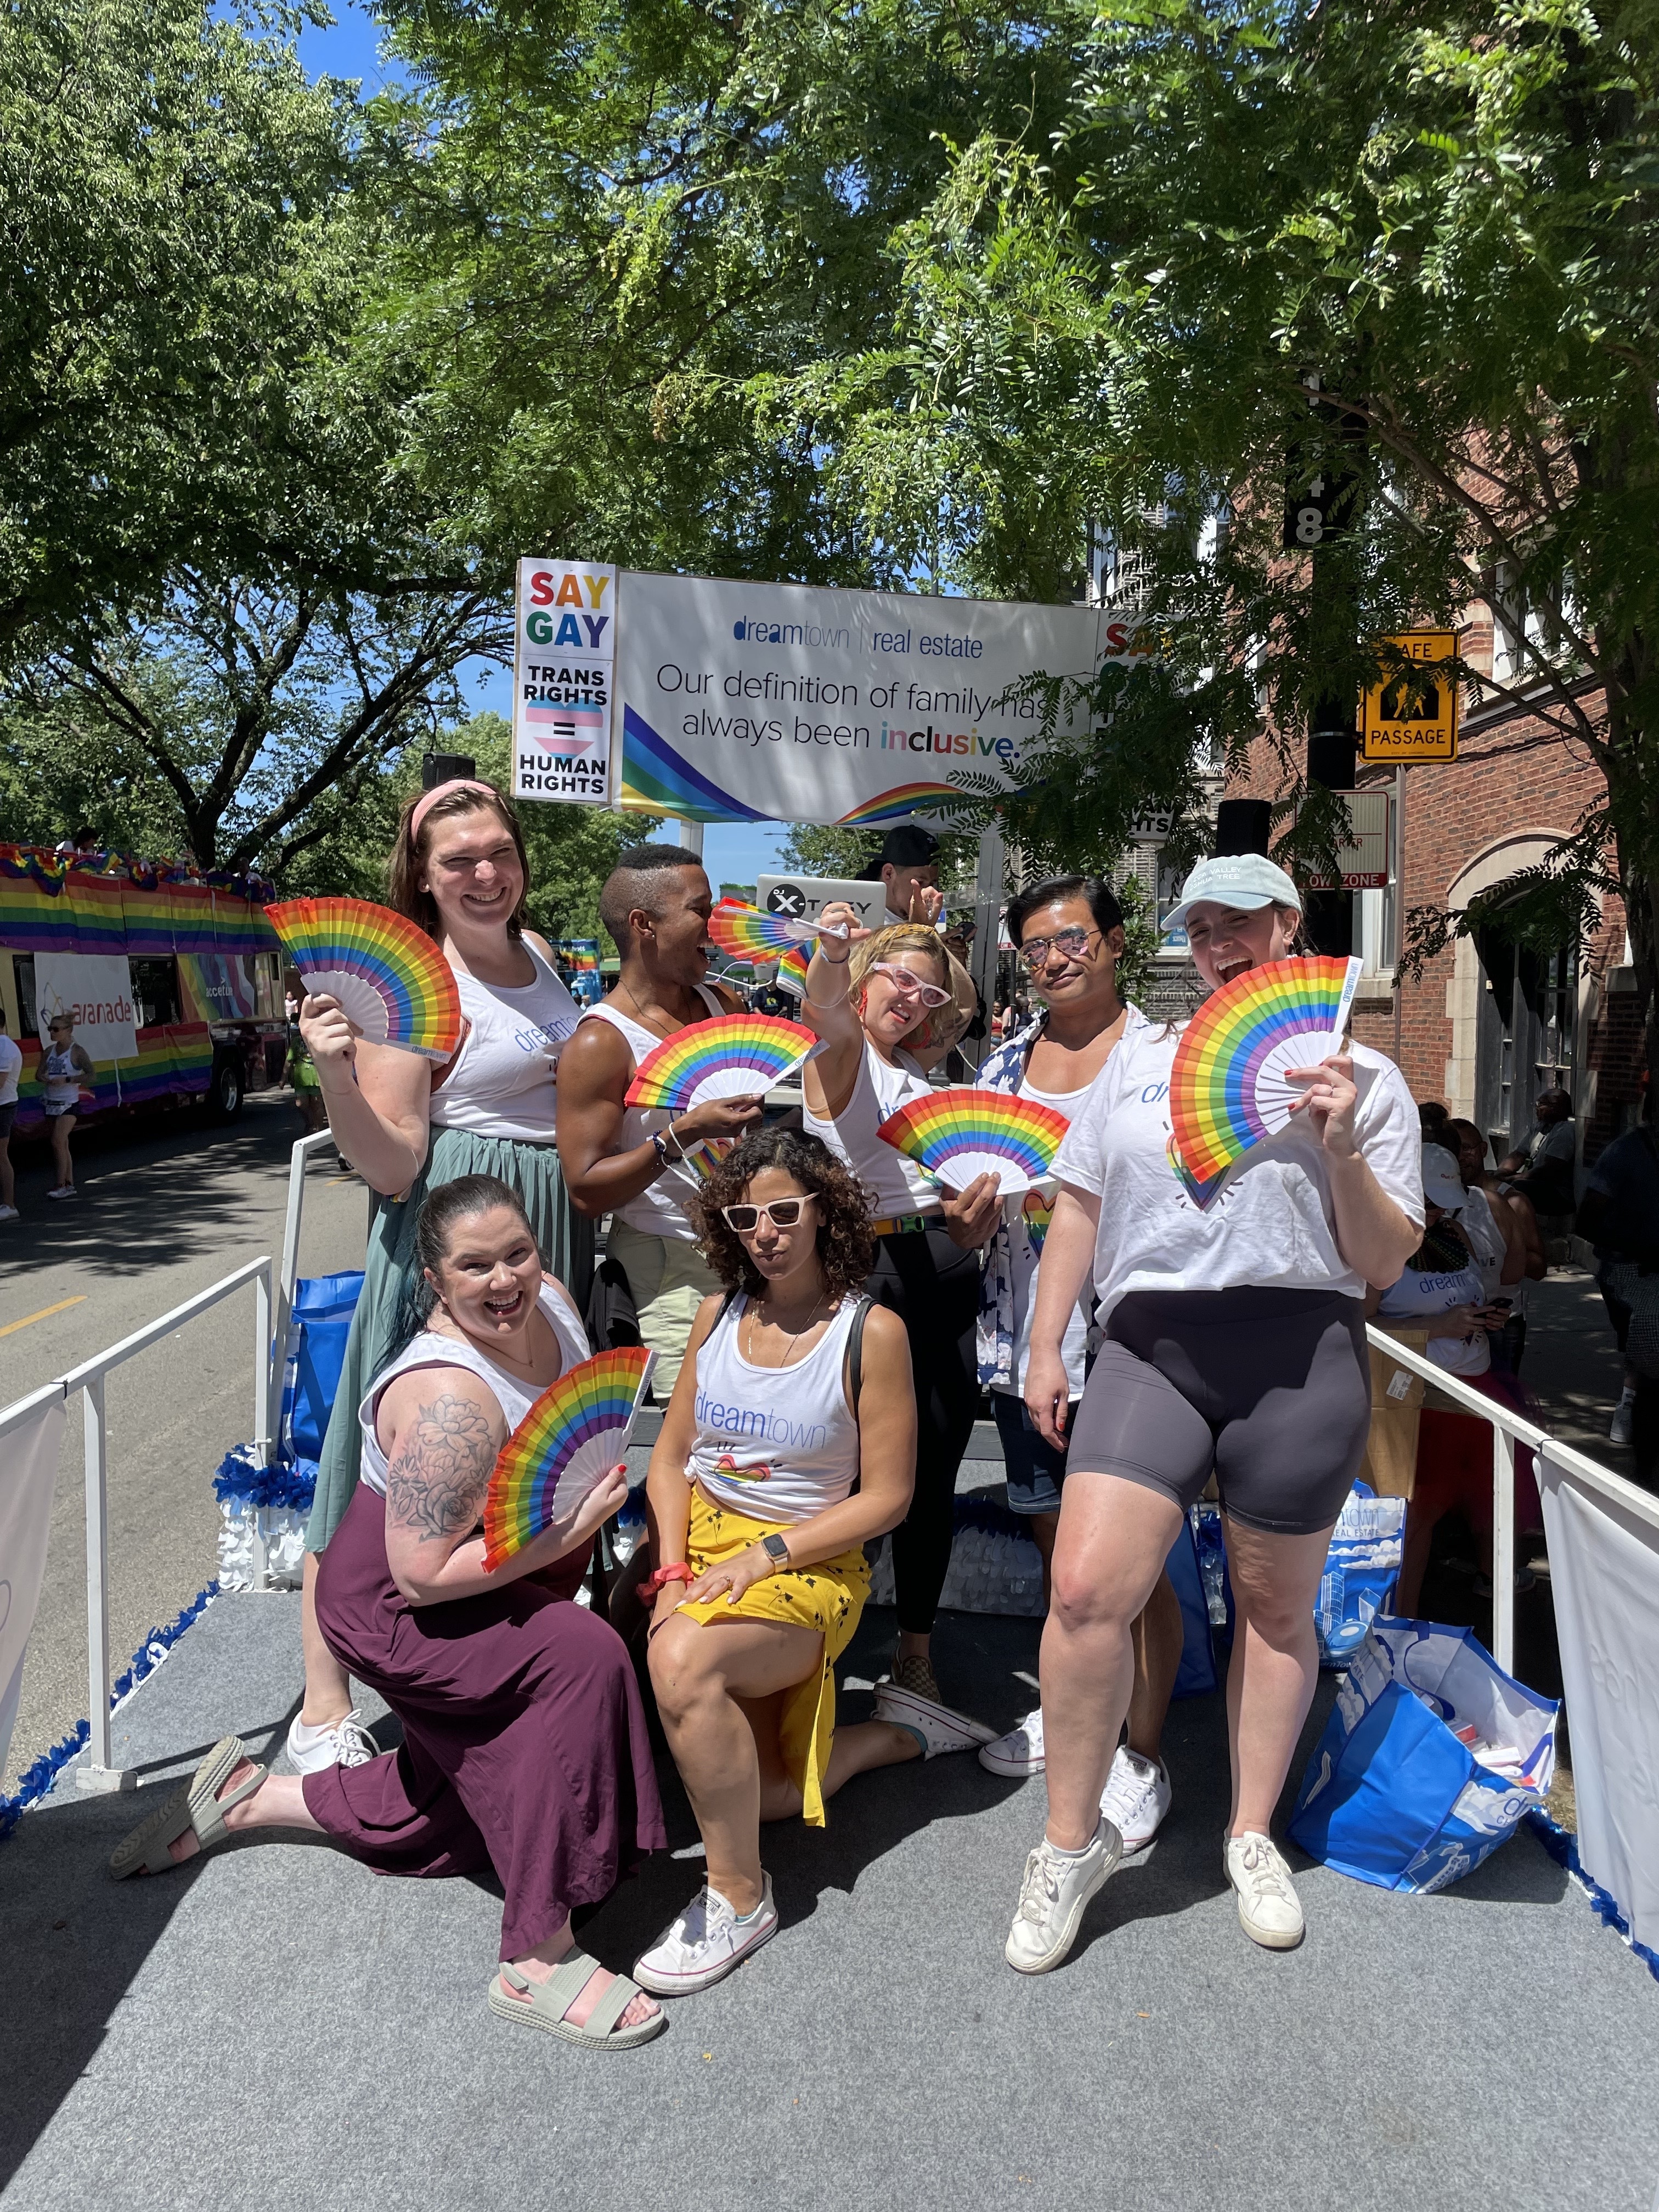 Dream Town employees at Pride Parade